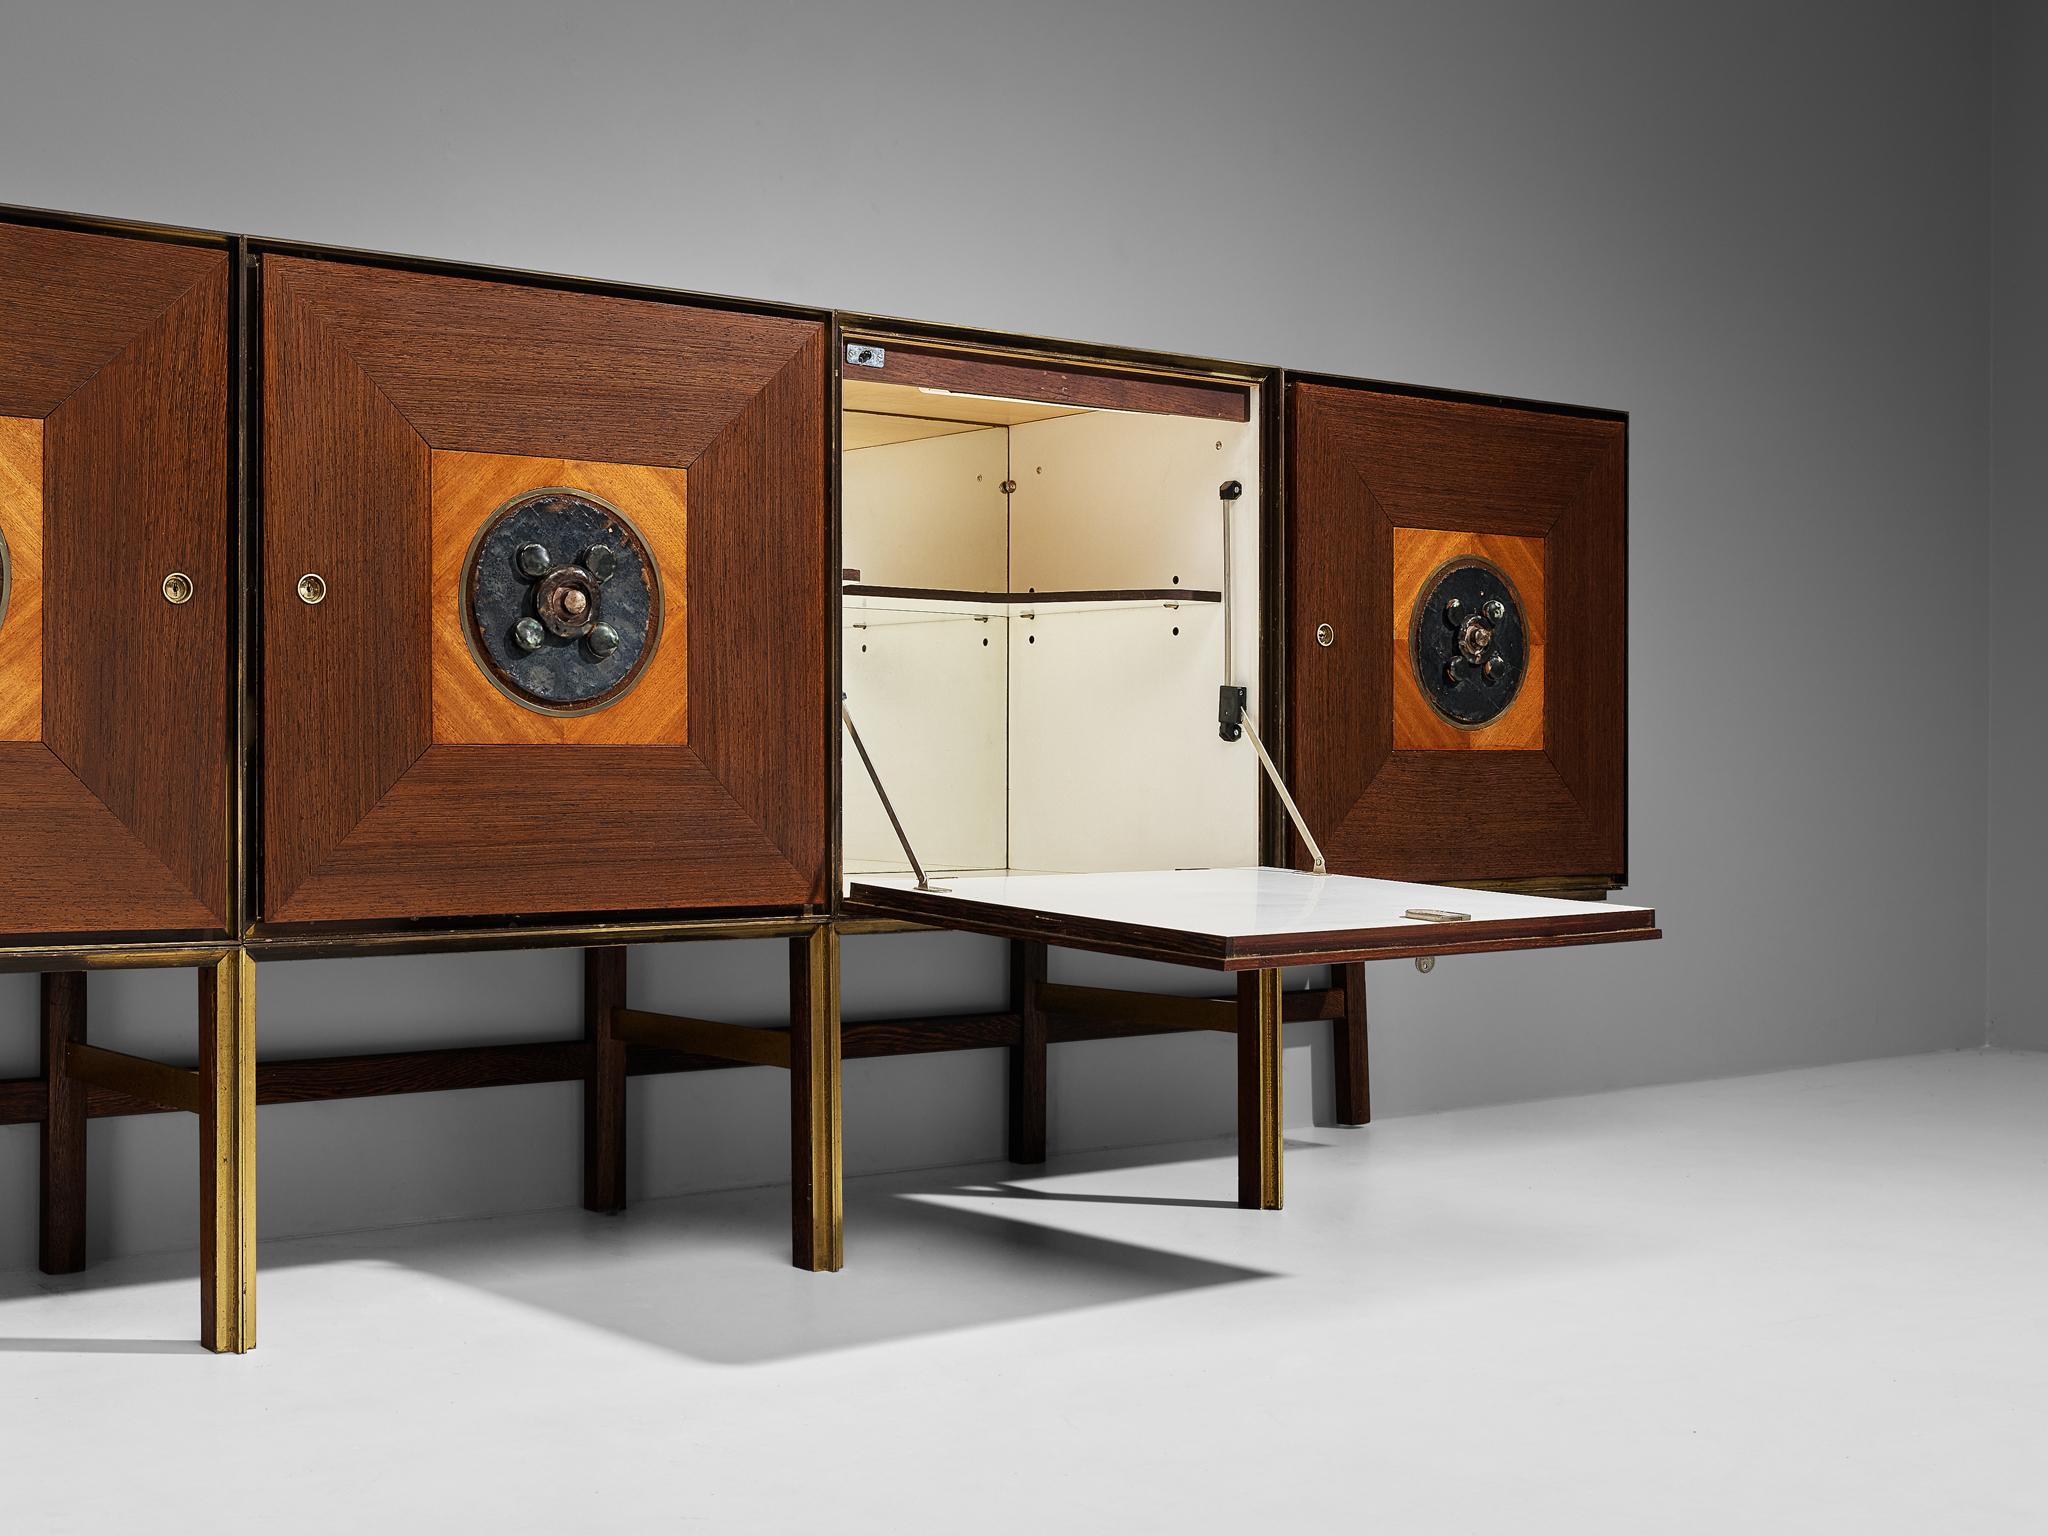 Exceptional Flemish Sideboard in Wengé and Ceramics